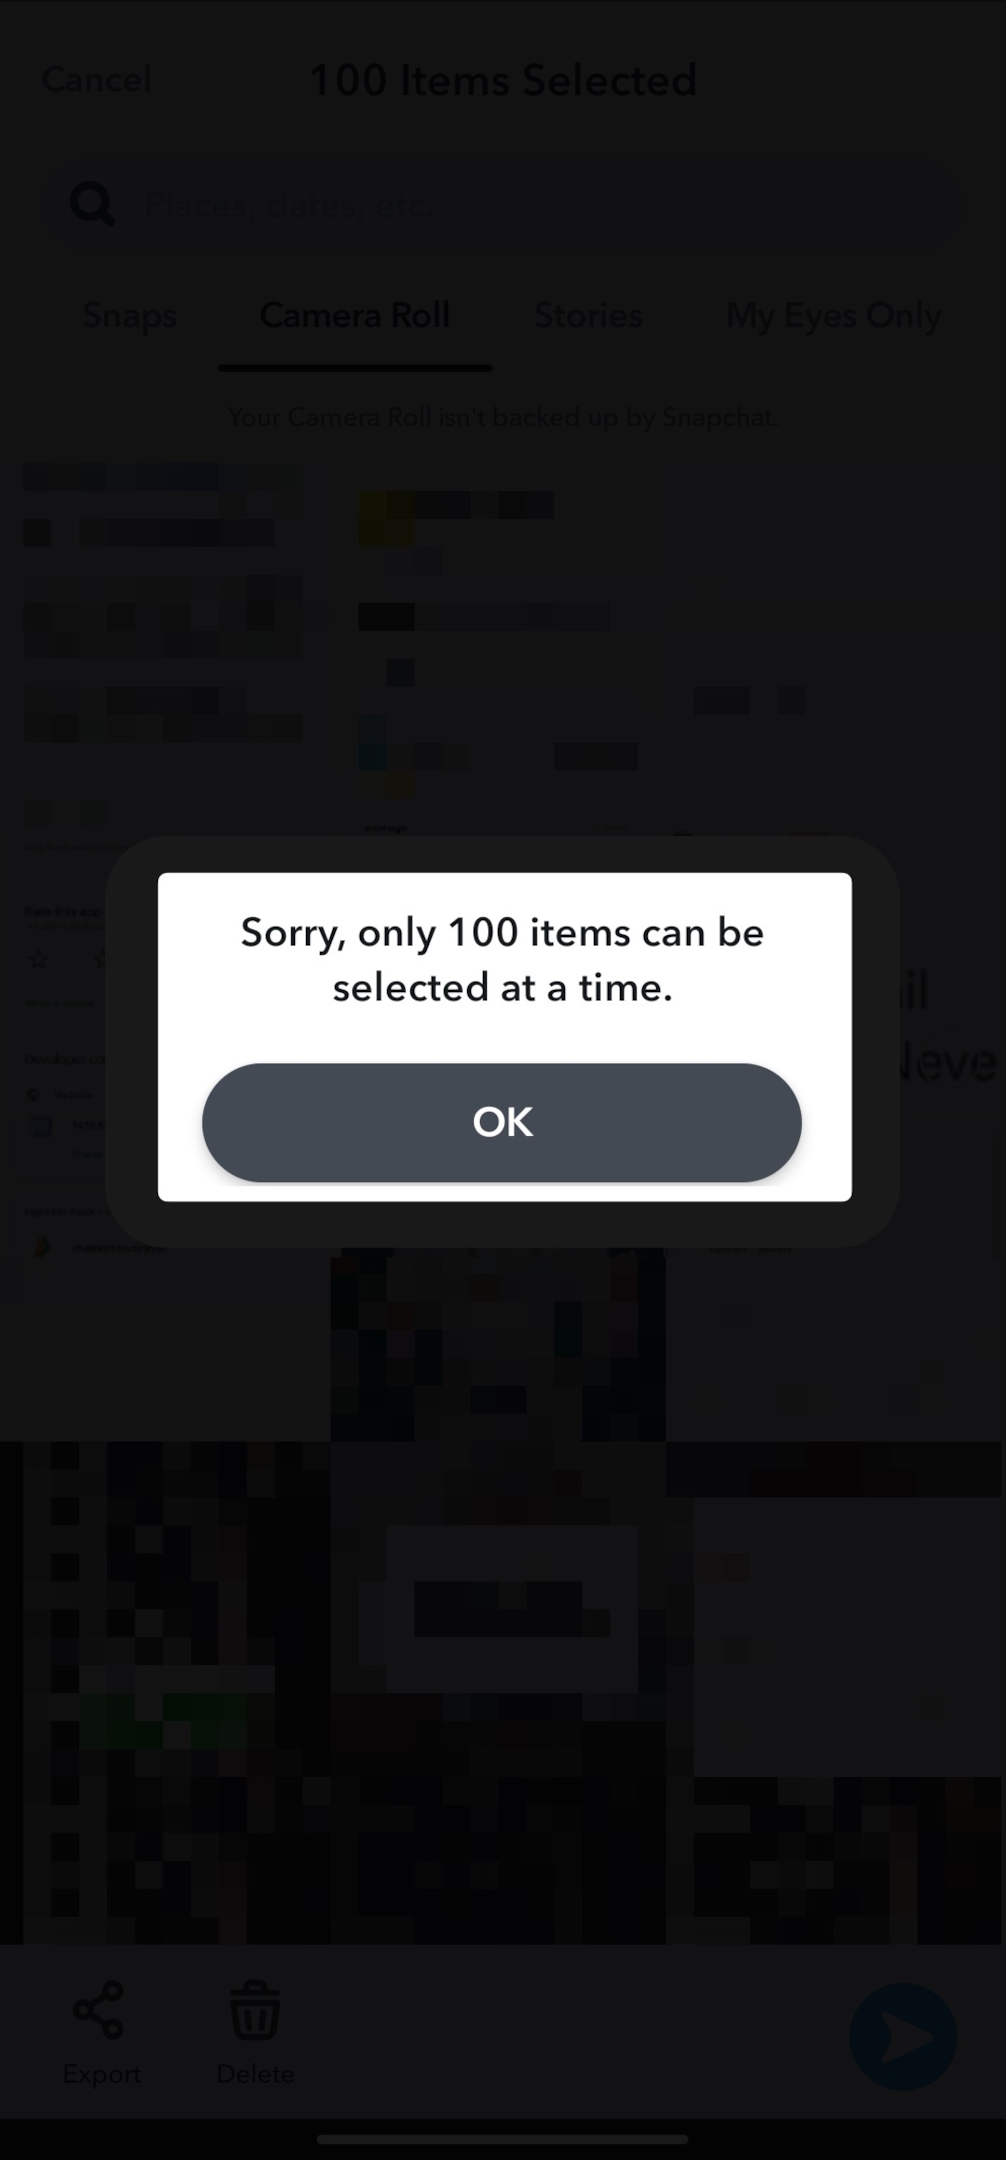 Remote.tools highlighting the warning pop up when you try to send more than 100 snaps to Snapchat story. At a time, you can only send upto 100 snaps to snapchat story